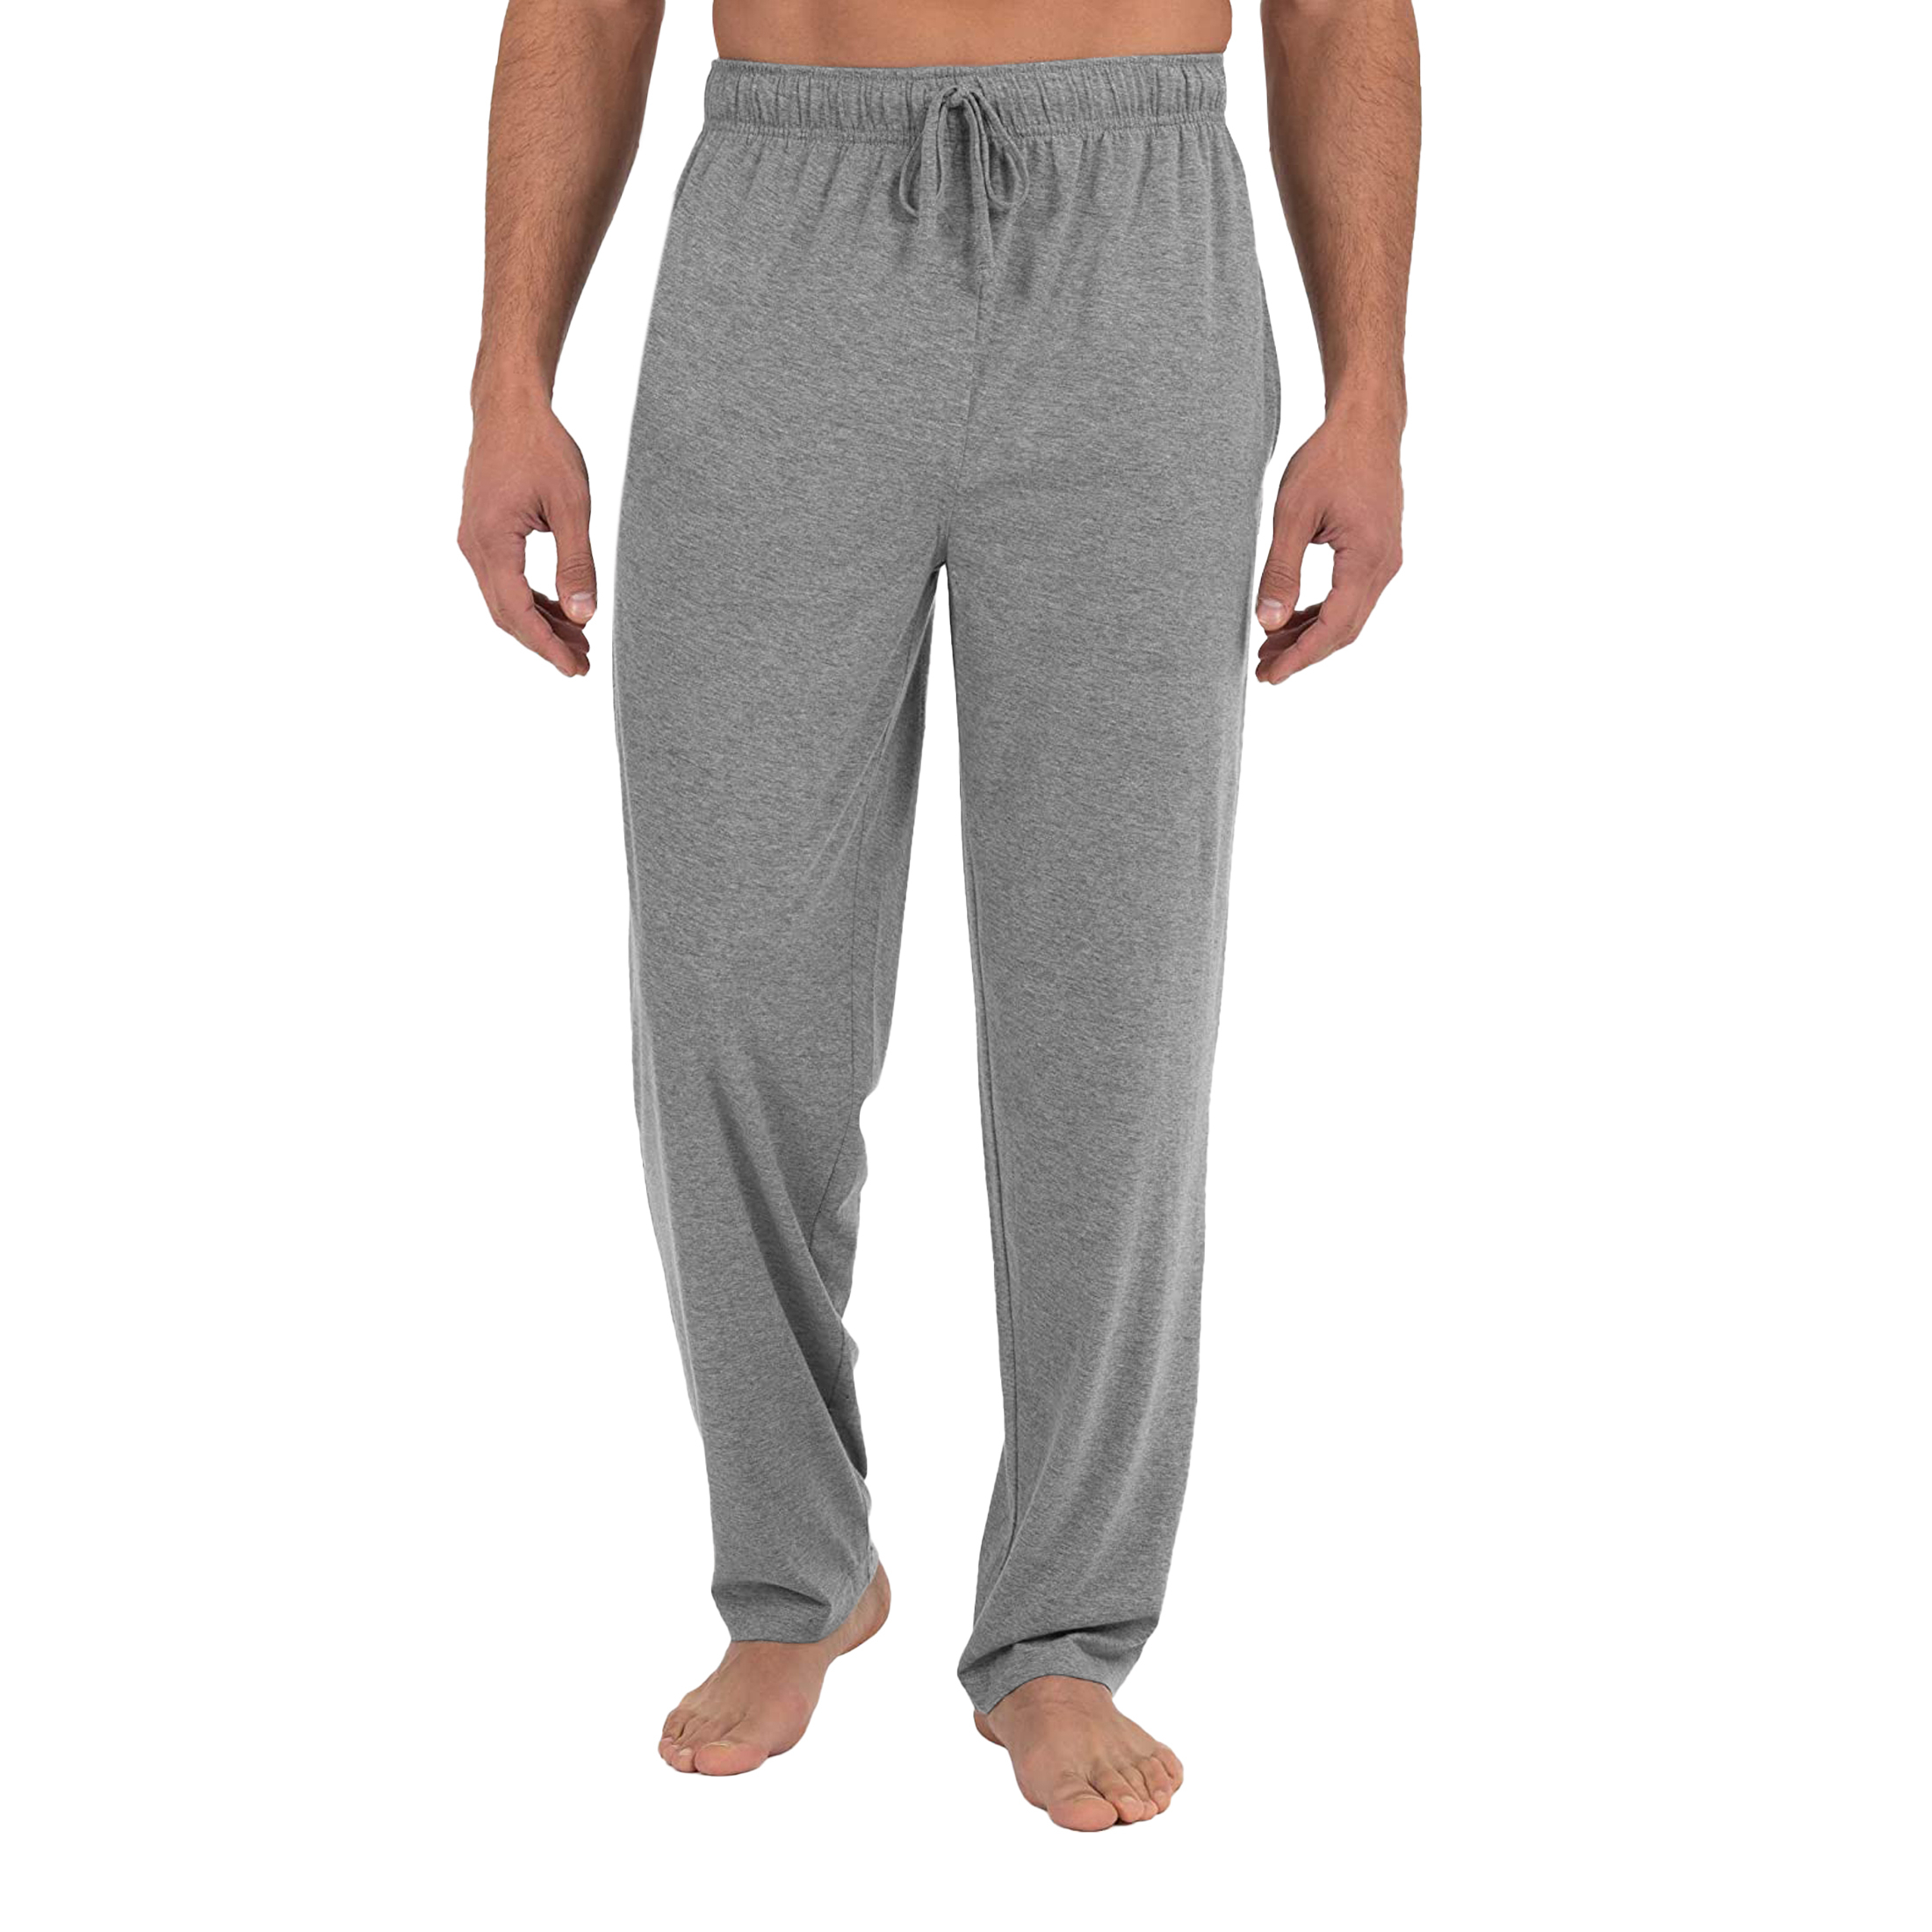 Men's Soft Jersey Knit Long Lounge Sleep Pants With Pockets - Solid, X-Large